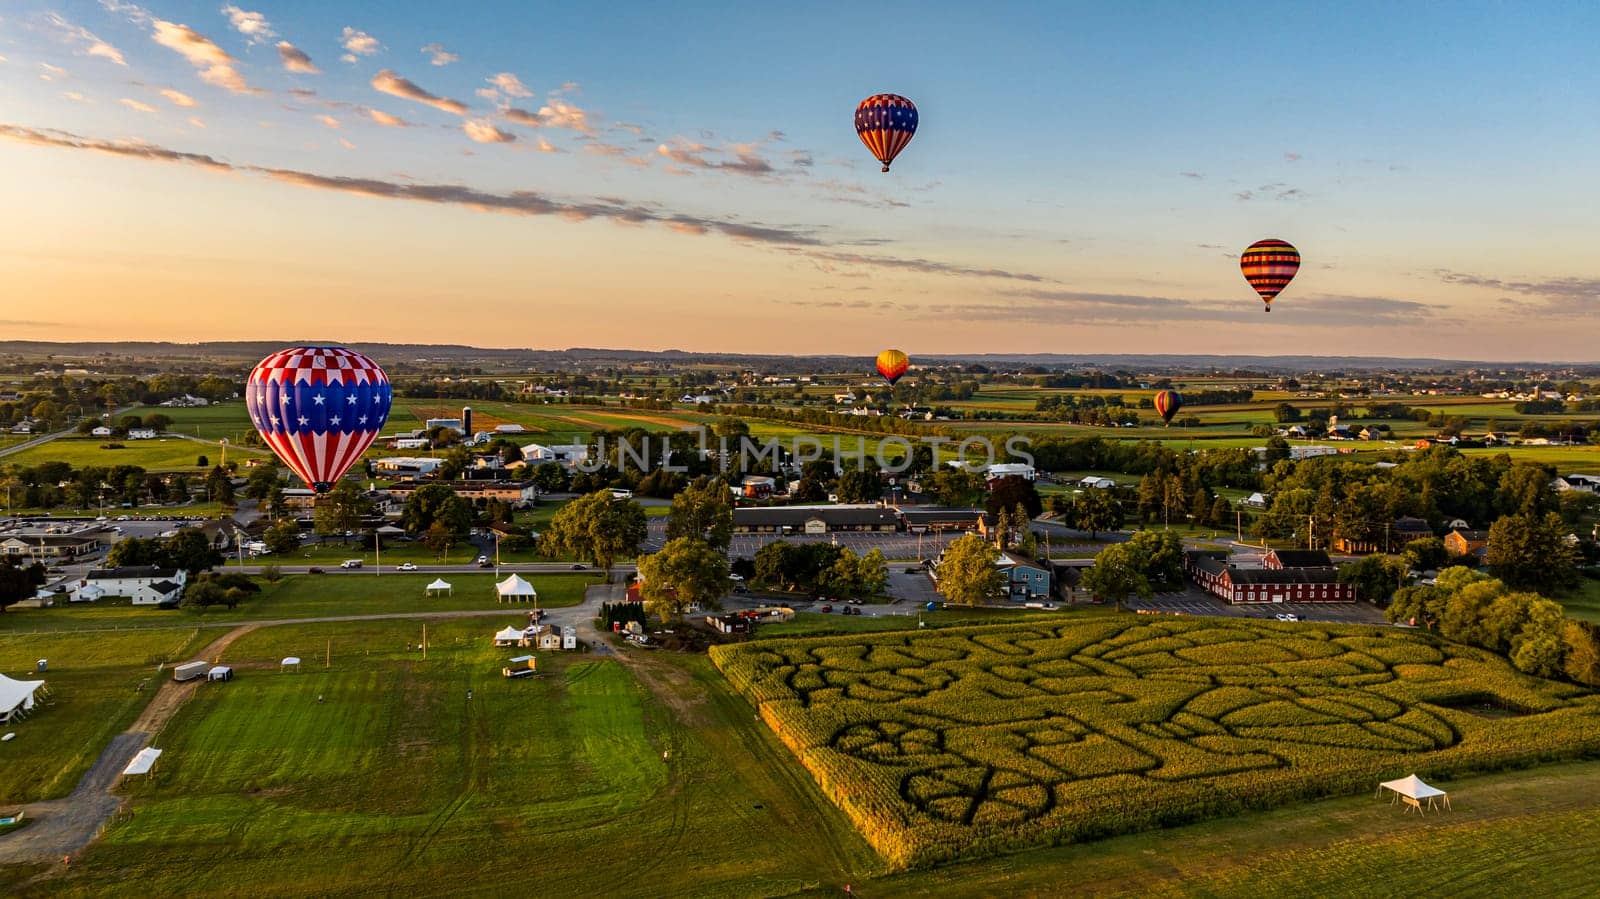 An Aerial View of Multiple Hot Air Balloons Soar Over A Picturesque Landscape Featuring A Corn Maze, Town, And Fields During A Golden Hour Sunset.